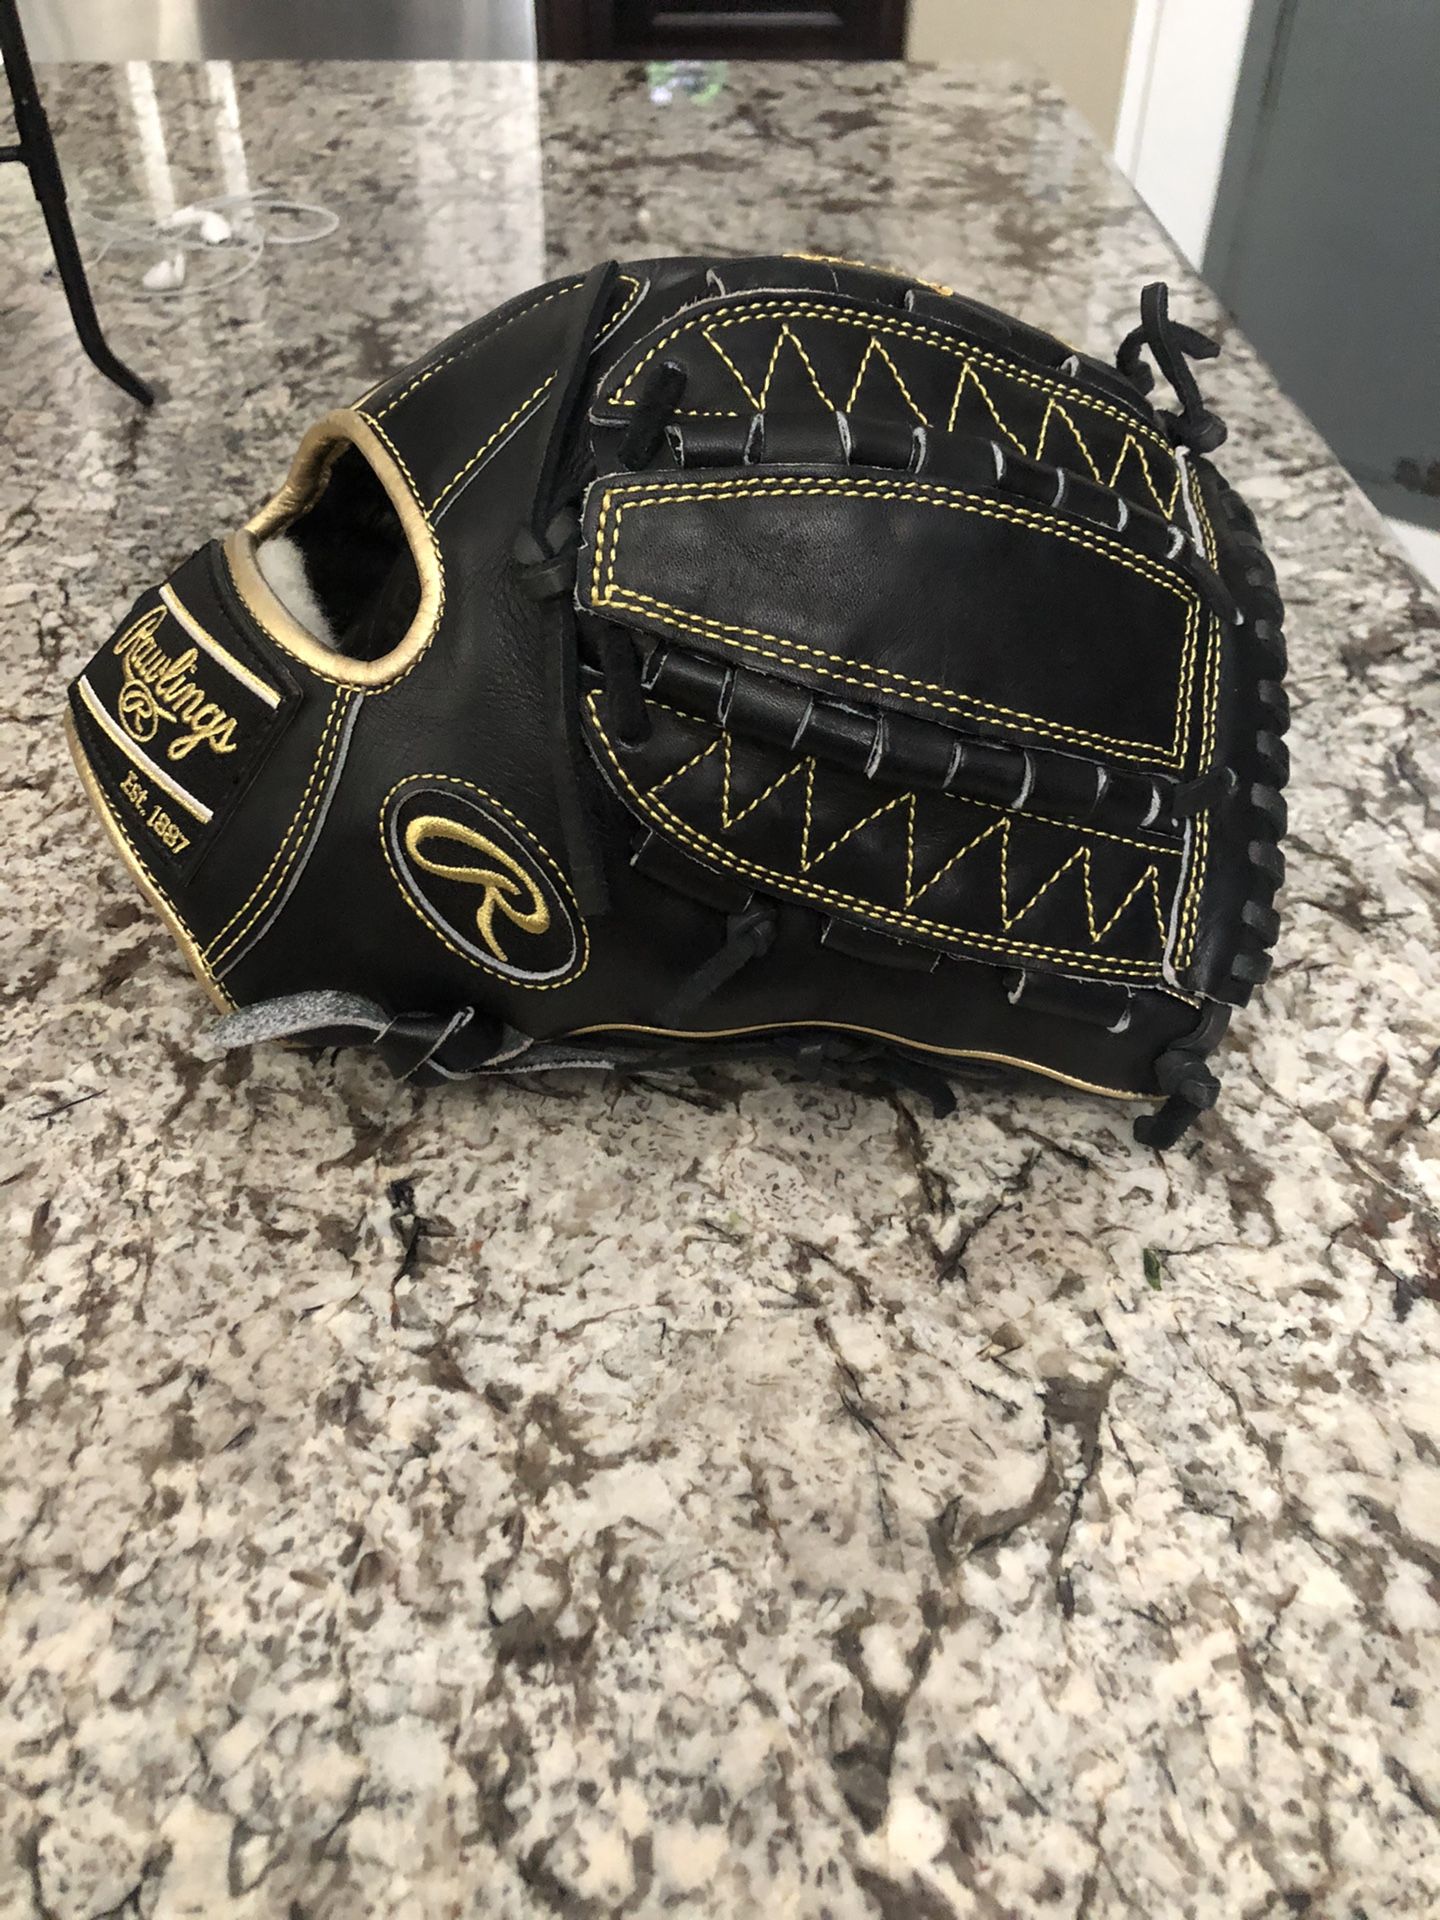 Rawlings Pro Preferred Limited Edition Glove